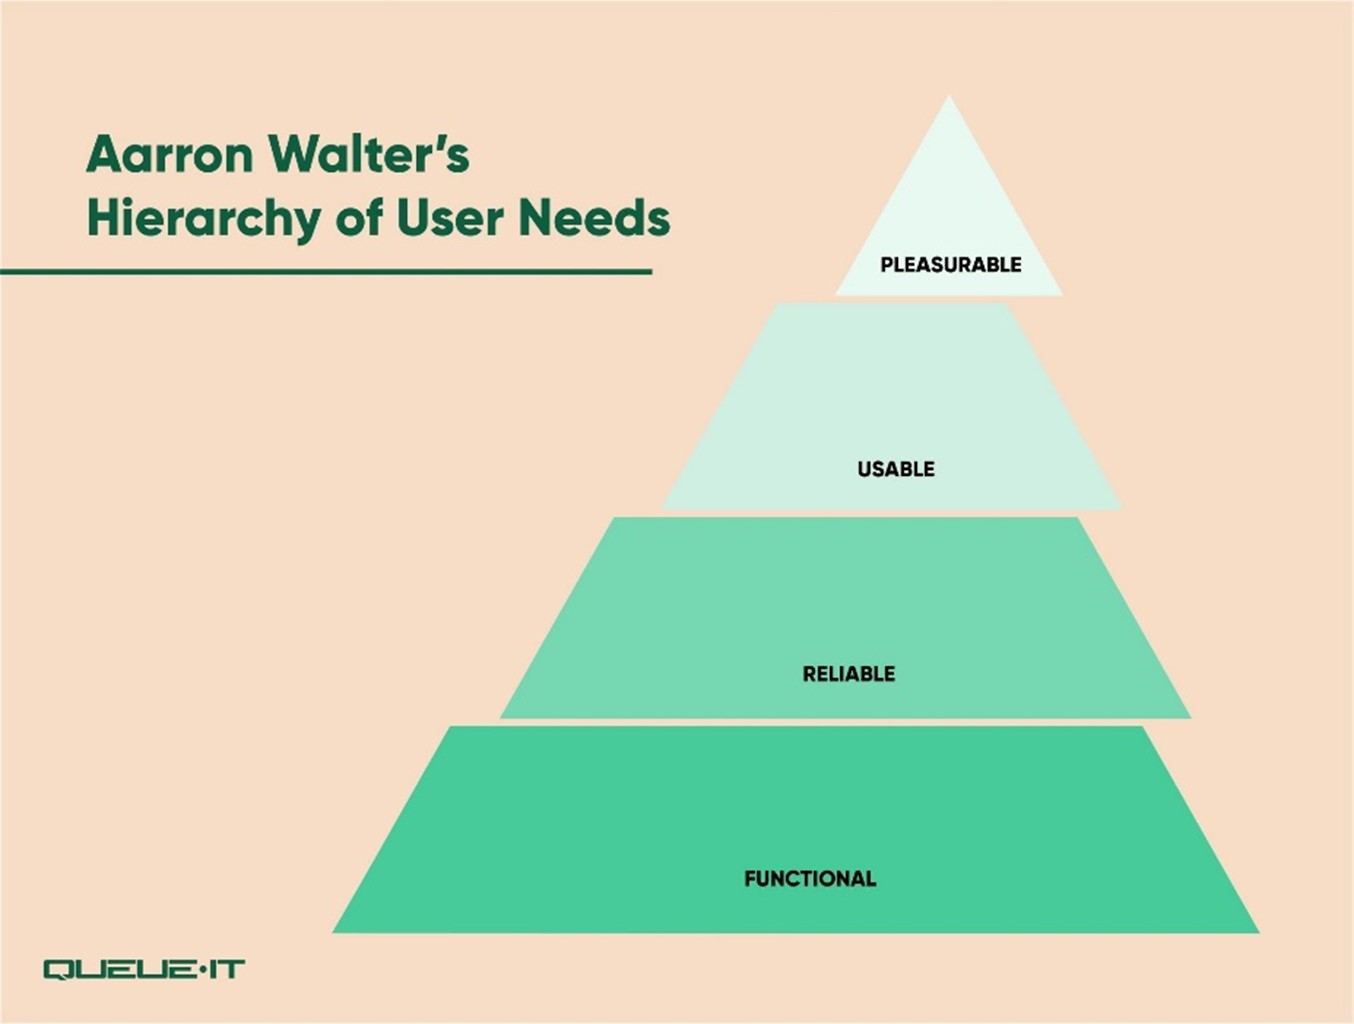 Aaron Walter's hierarchy of user needs: functional, reliable, usable, pleasurable